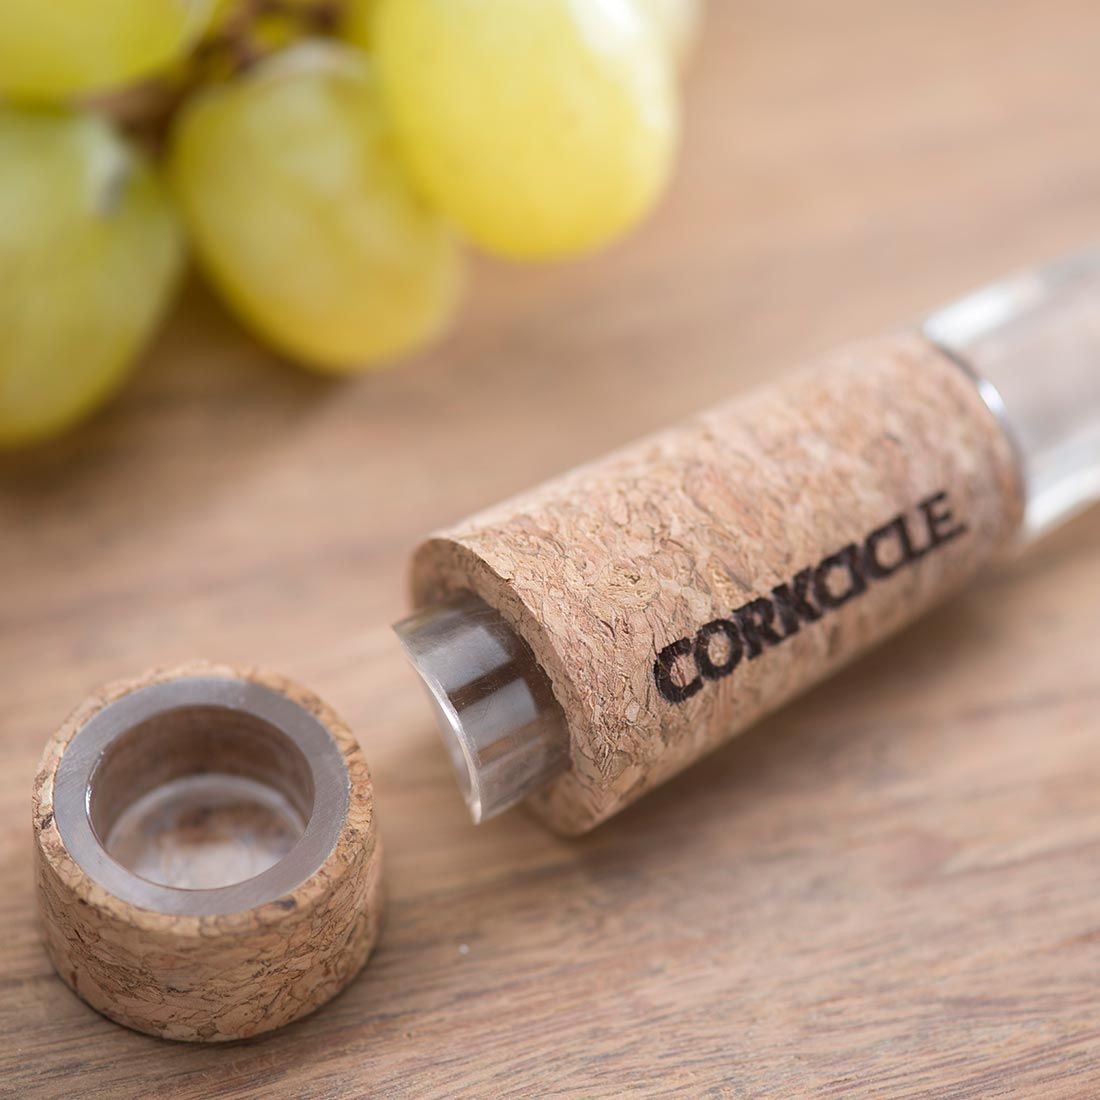 Corkcicle Air 4-in-1 Chiller, Aerator, Pourer, Stopper Wine Gadget Review 